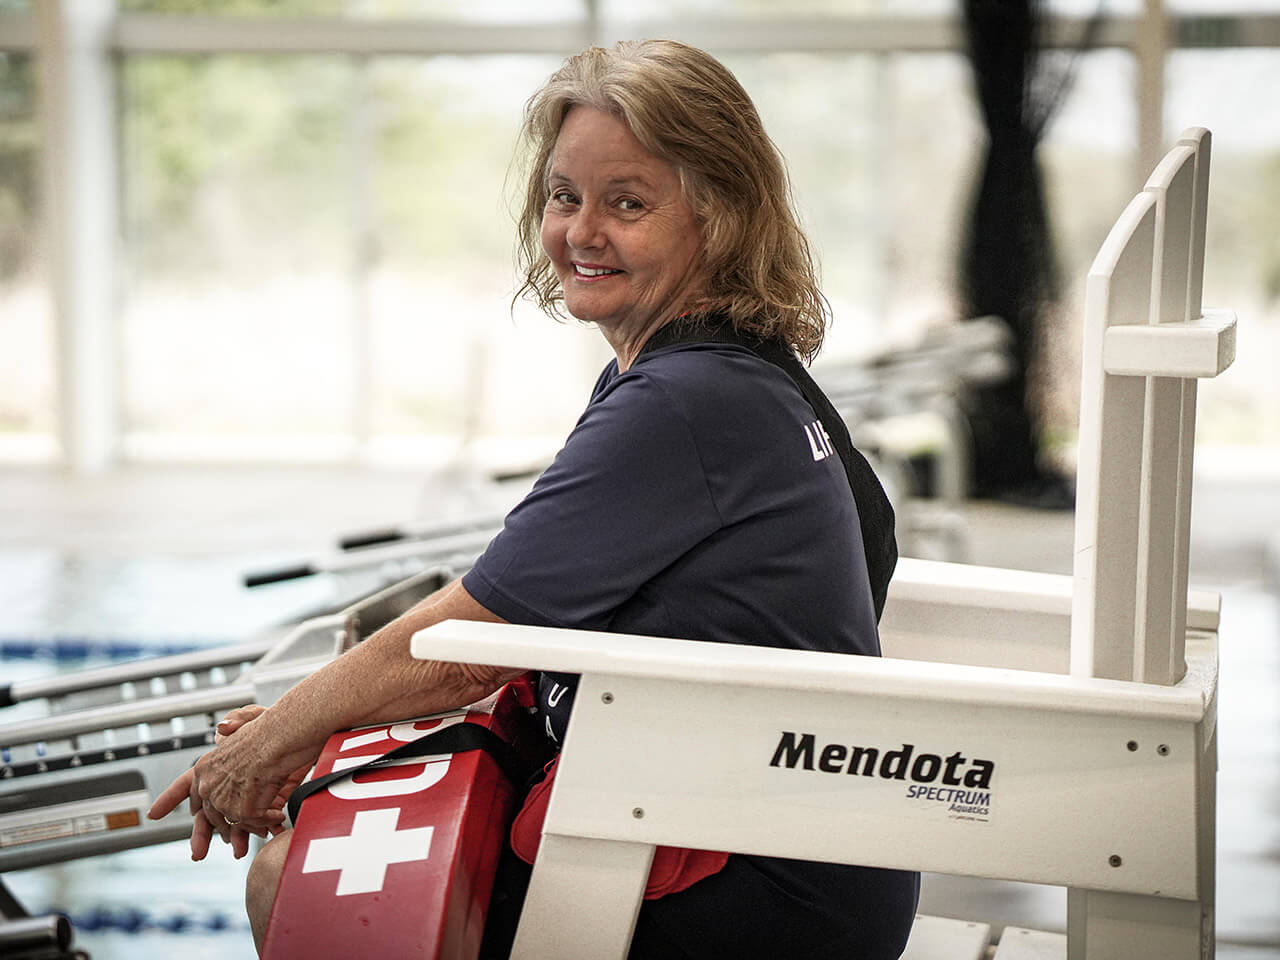 A lifeguard sits at a lifeguard stand holding a flotation device. She is looking over her shoulder and smiling.